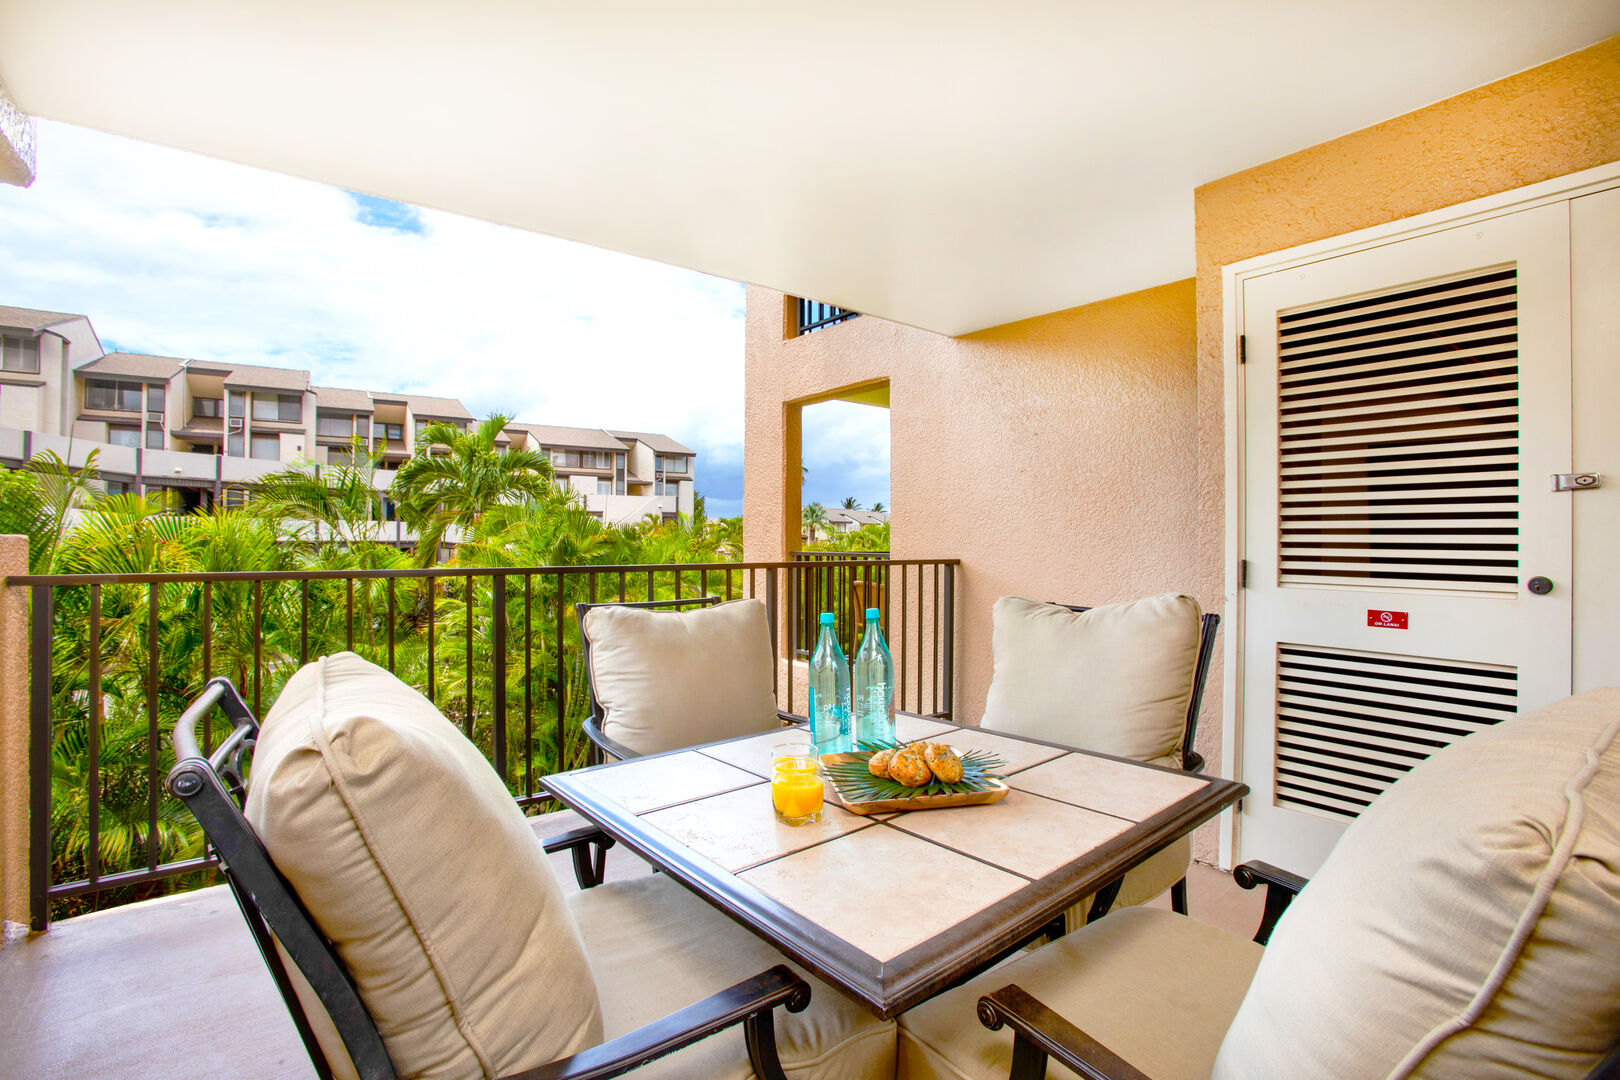 Relax and take a look at the garden view at your own private lanai!